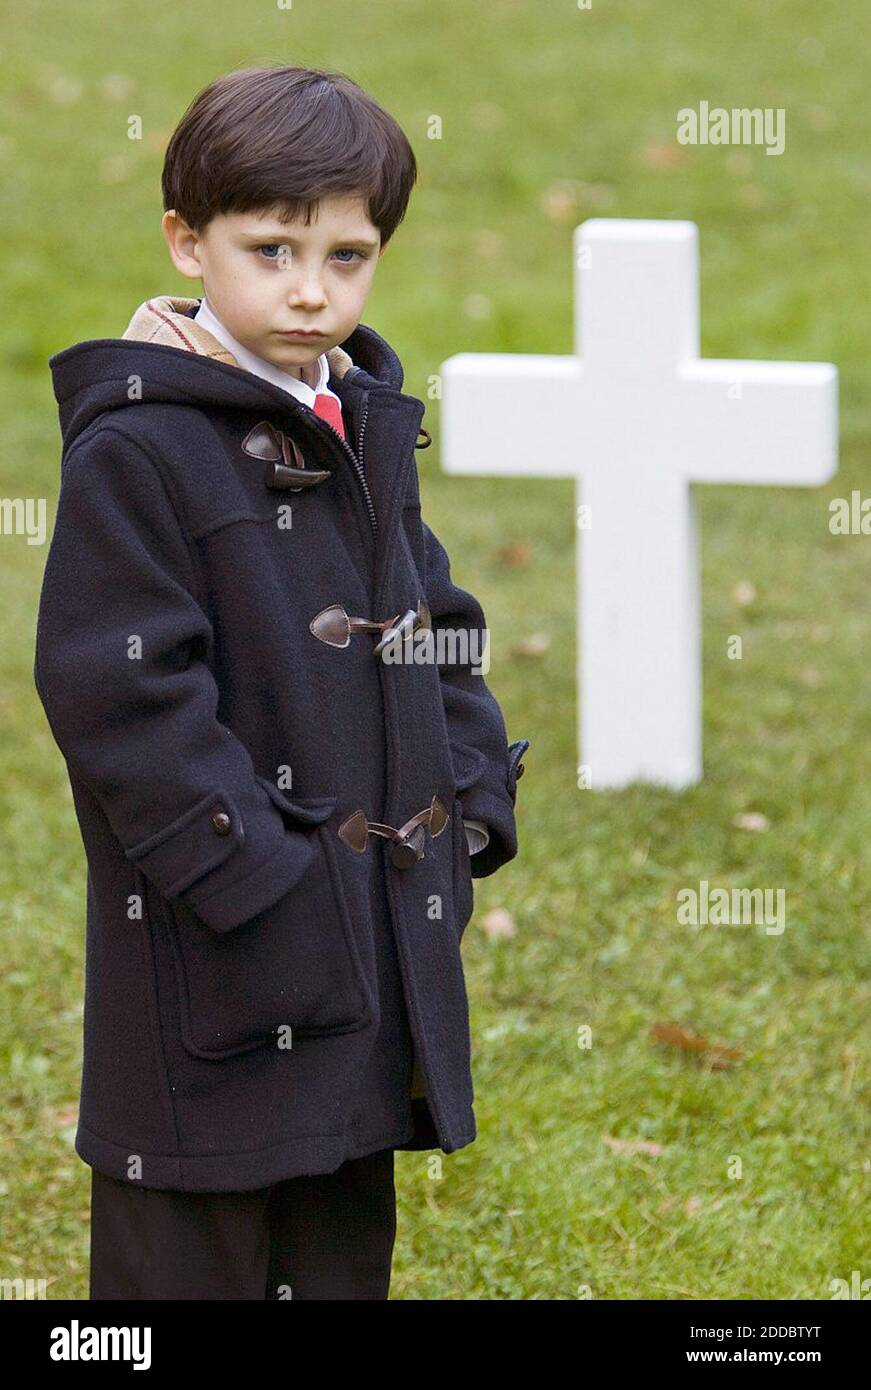 NO FILM, NO VIDEO, NO TV, NO DOCUMENTARY - Seamus Davey-Fitzpatrick makes his motion picture debut in 'The Omen' portraying Damien Thorn. Photo via KRT/ABACAPRESS.COM Stock Photo